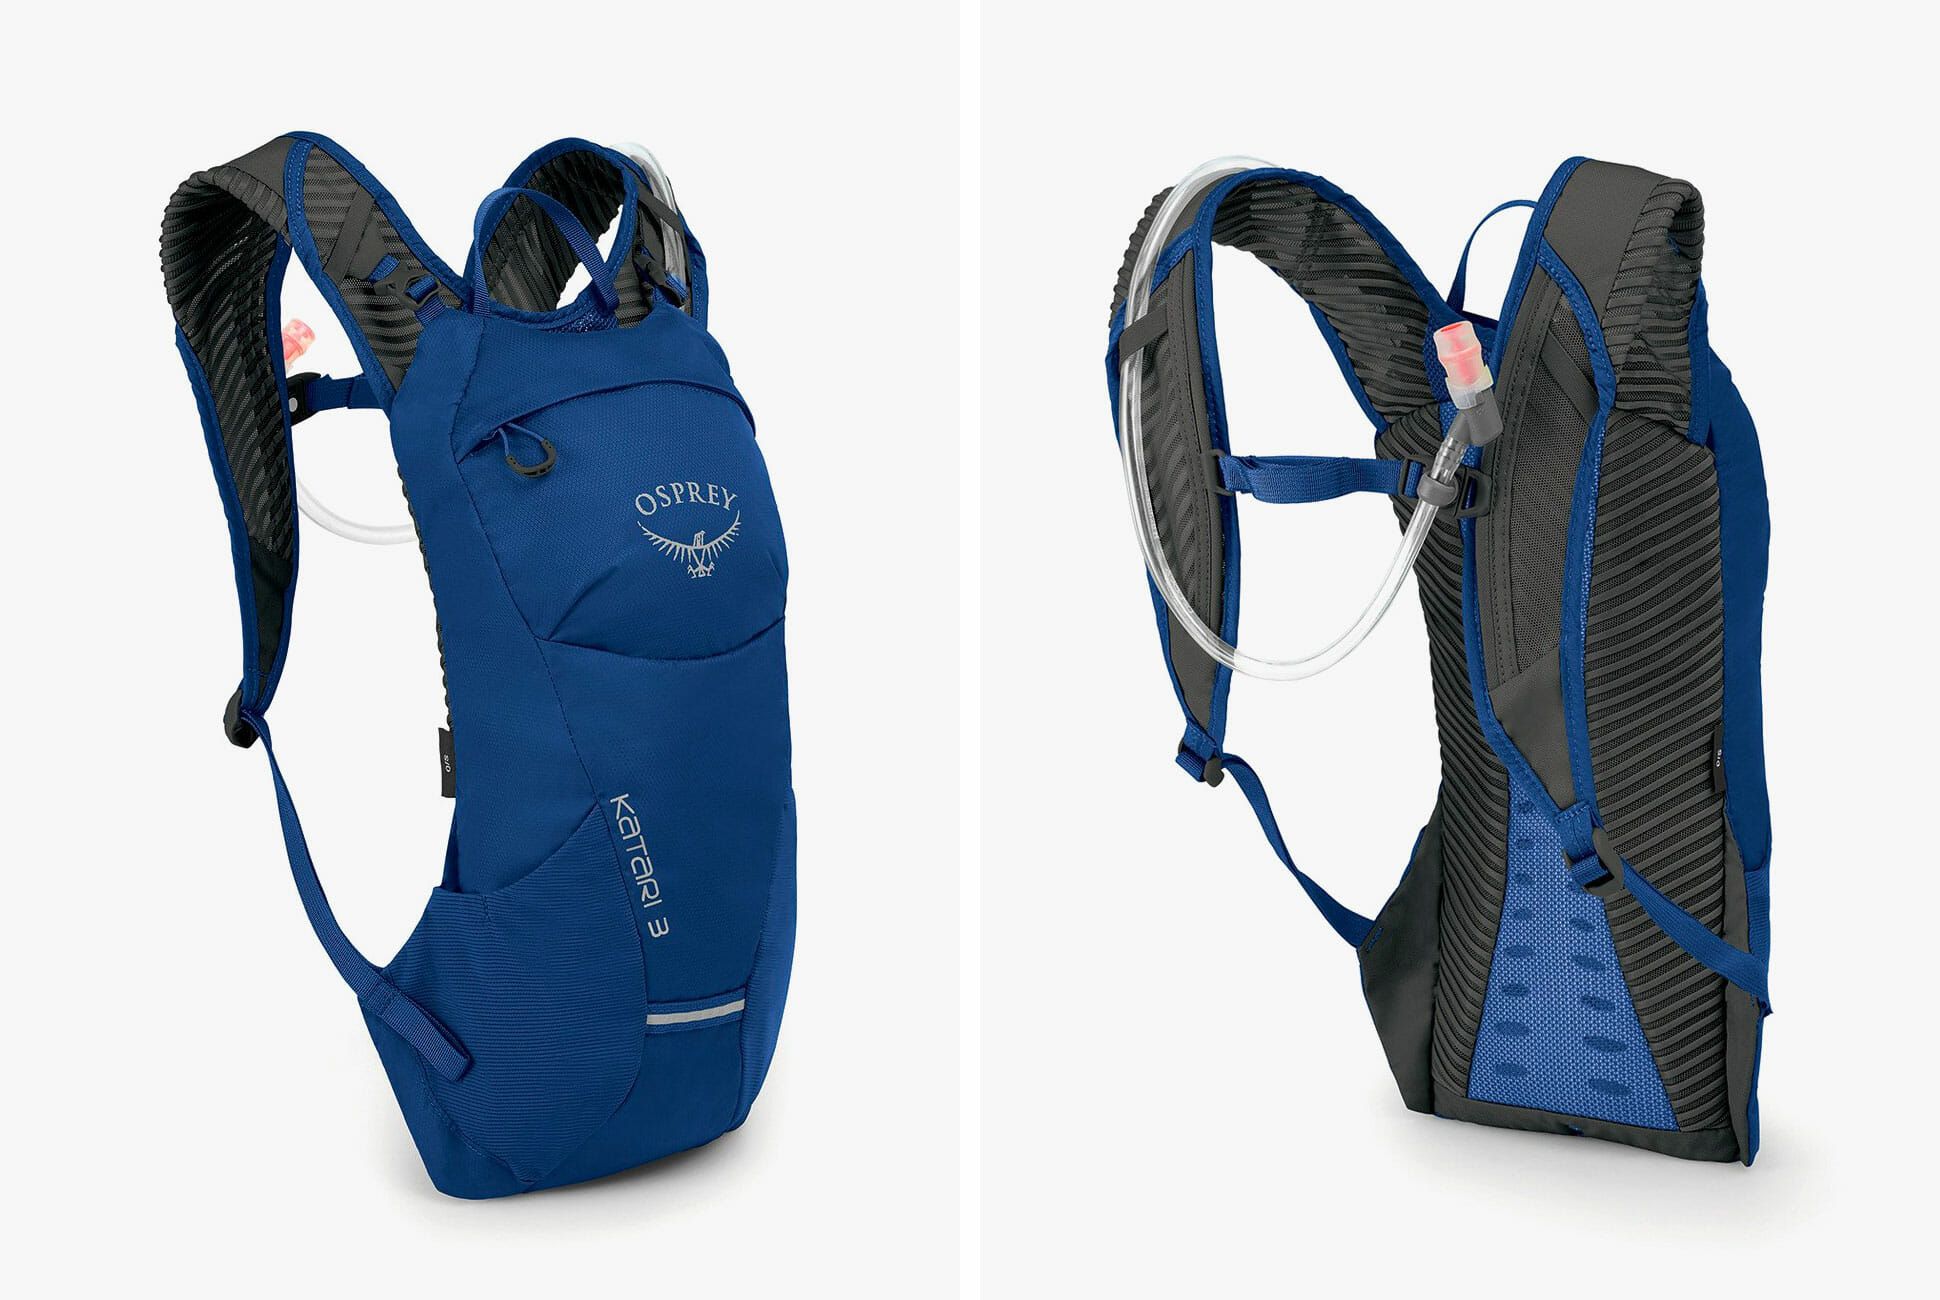 Osprey's New Backpacks Are Perfect for Mountain Bikers